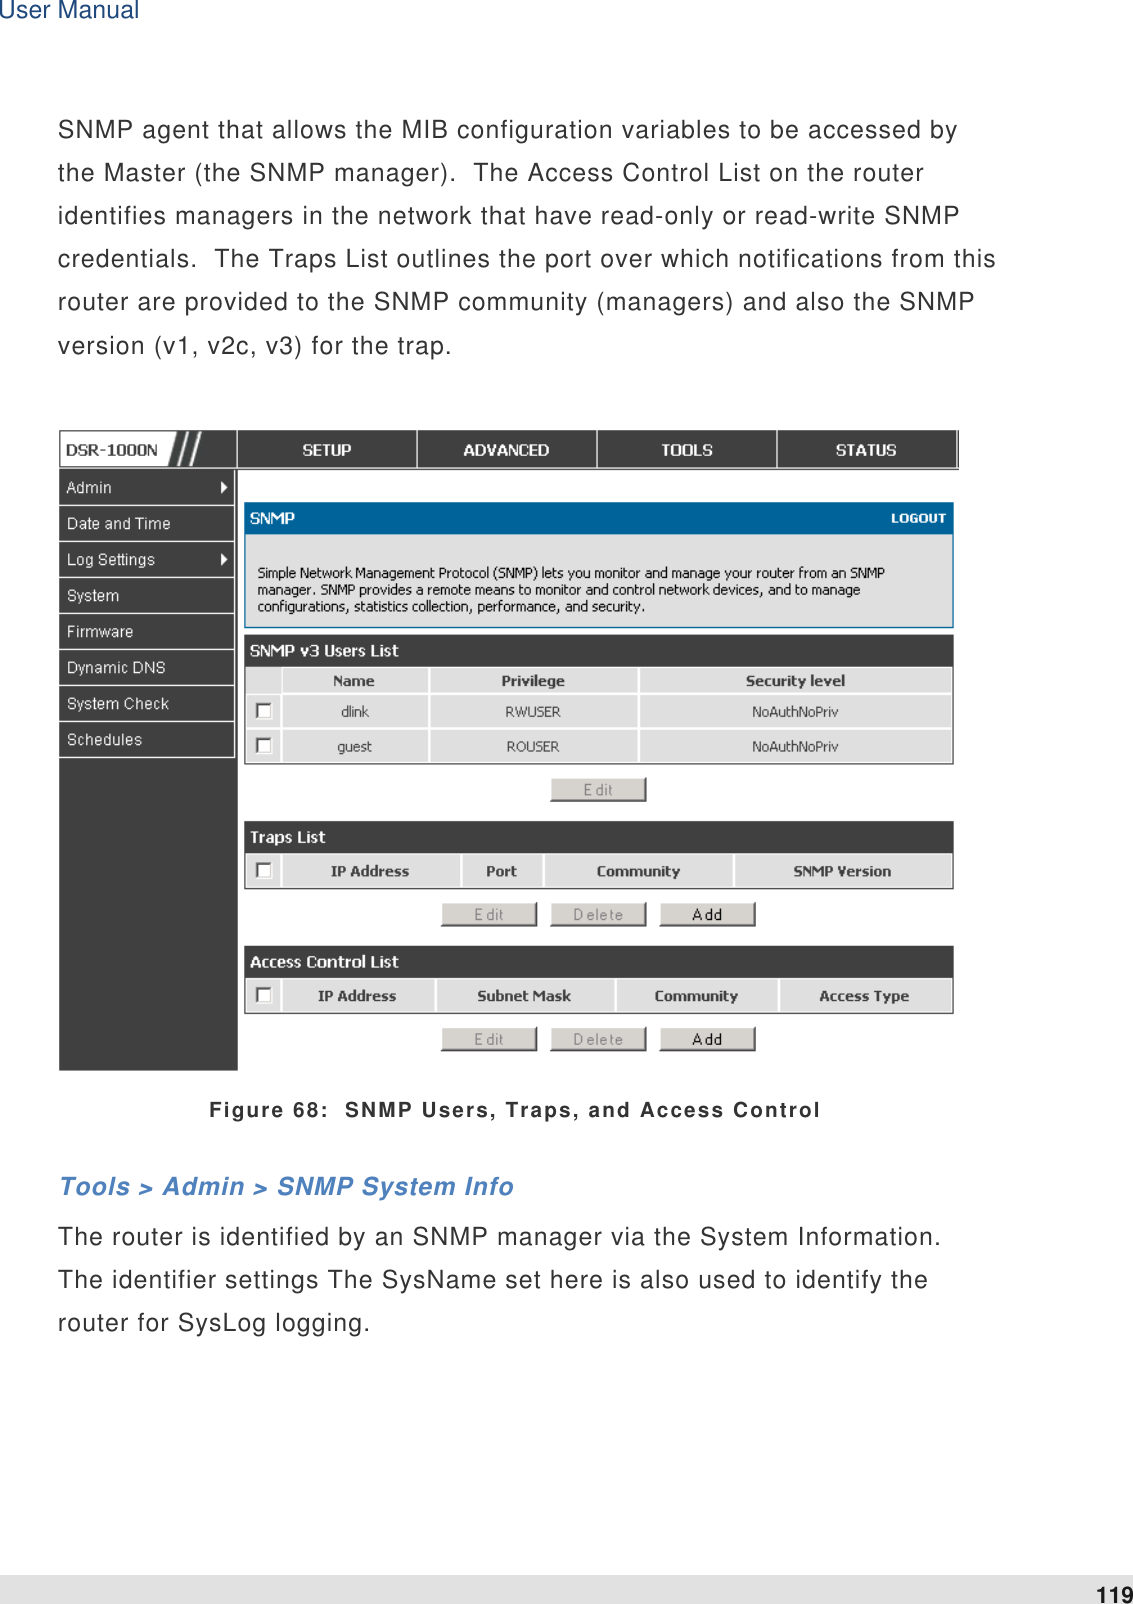 User Manual 119   SNMP agent that allows the MIB configuration variables to be accessed by the Master (the SNMP manager).  The Access Control List on the router identifies managers in the network that have read-only or read-write SNMP credentials.  The Traps List outlines the port over which notifications from this router are provided to the SNMP community (managers) and also the SNMP version (v1, v2c, v3) for the trap.    Figure 68:  SNMP Users, Traps, and Access Control Tools &gt; Admin &gt; SNMP System Info The router is identified by an SNMP manager via the System Information.  The identifier settings The SysName set here is also used to identify the router for SysLog logging.   